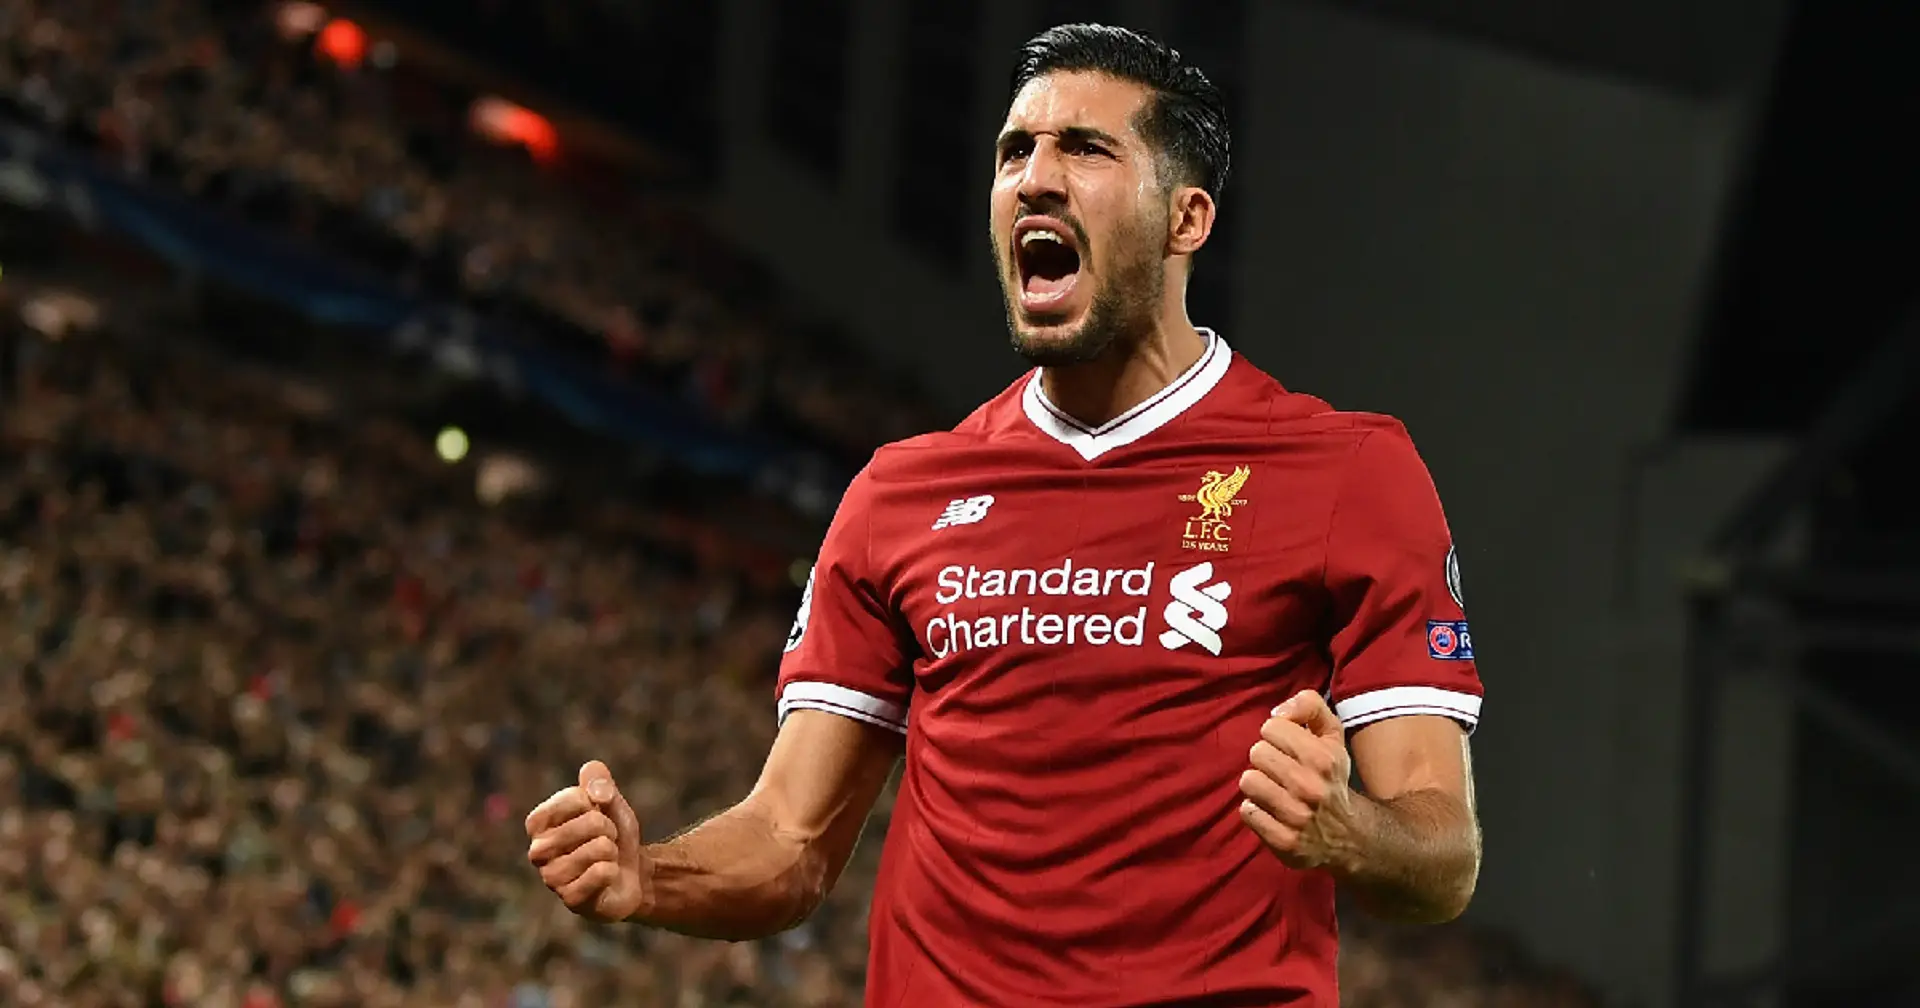 'The championship would be deserved if the season were to be abandoned': Former Red Emre Can believes Liverpool should be given the title if the season is voided